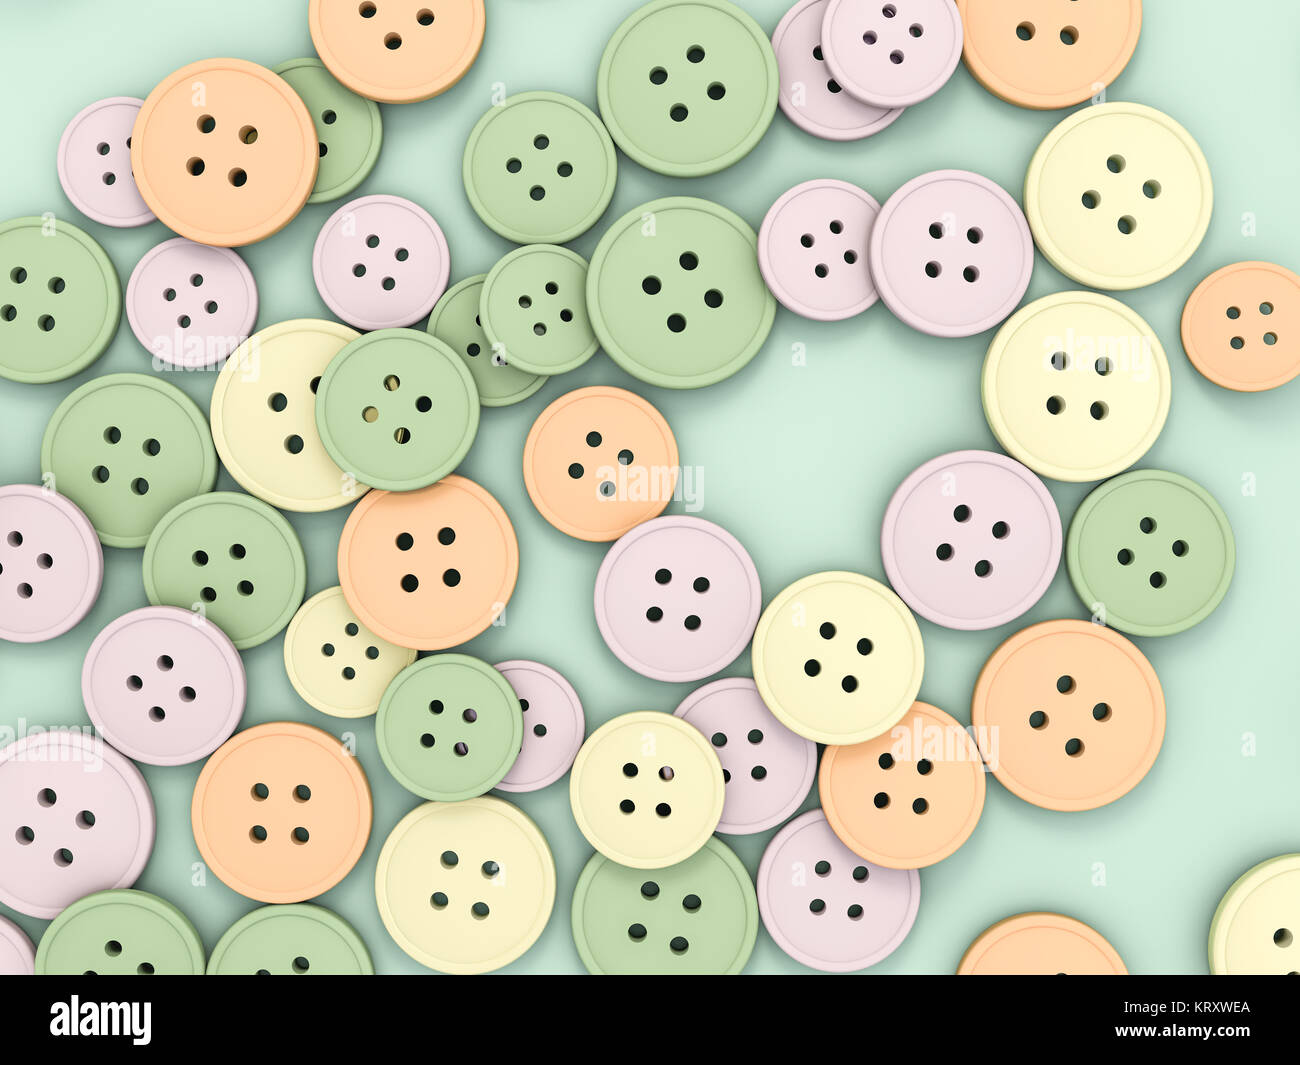 Abstract background from a collection of old buttons. 3D rendering Stock Photo